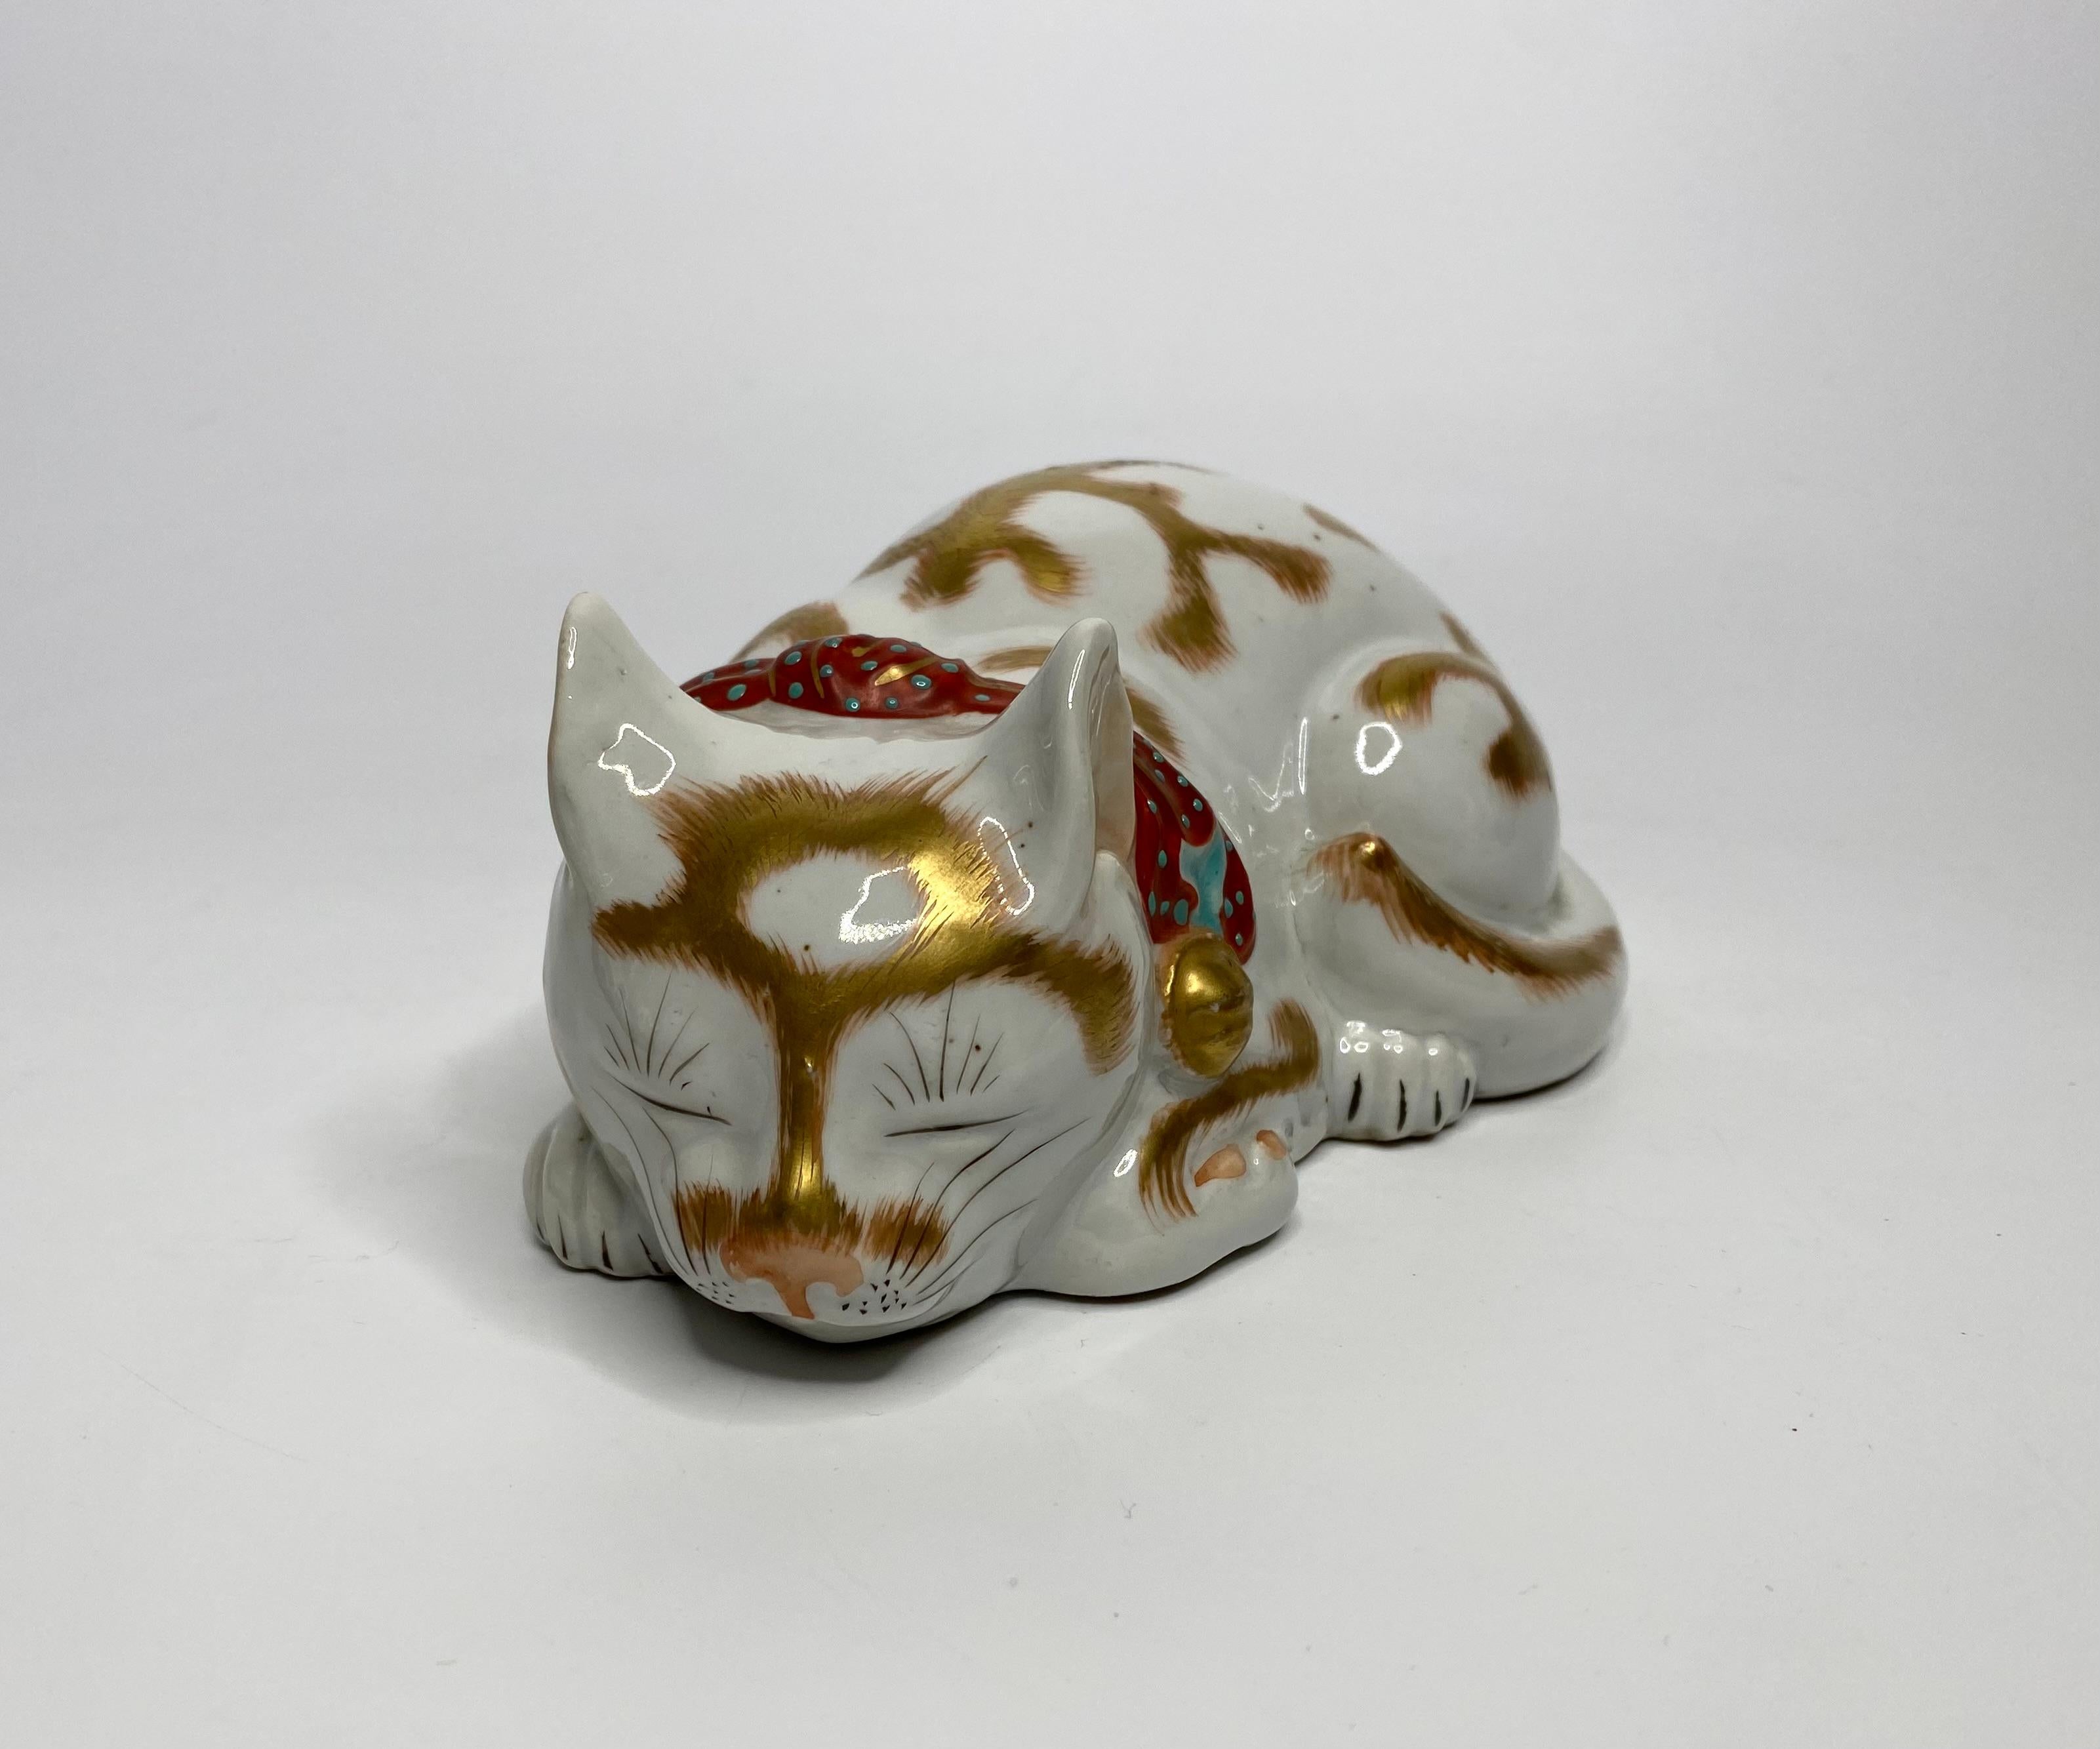 Kutani porcelain okimono of a cat, c. 1900. Meiji Period.

£490.00
Kutani porcelain okimono, Japan, c. 1900. Meiji Period. Finely modelled as a sleeping cat, its hair delineated in gilt. Wearing a fabric collar, enamels in iron red, with a turquoise